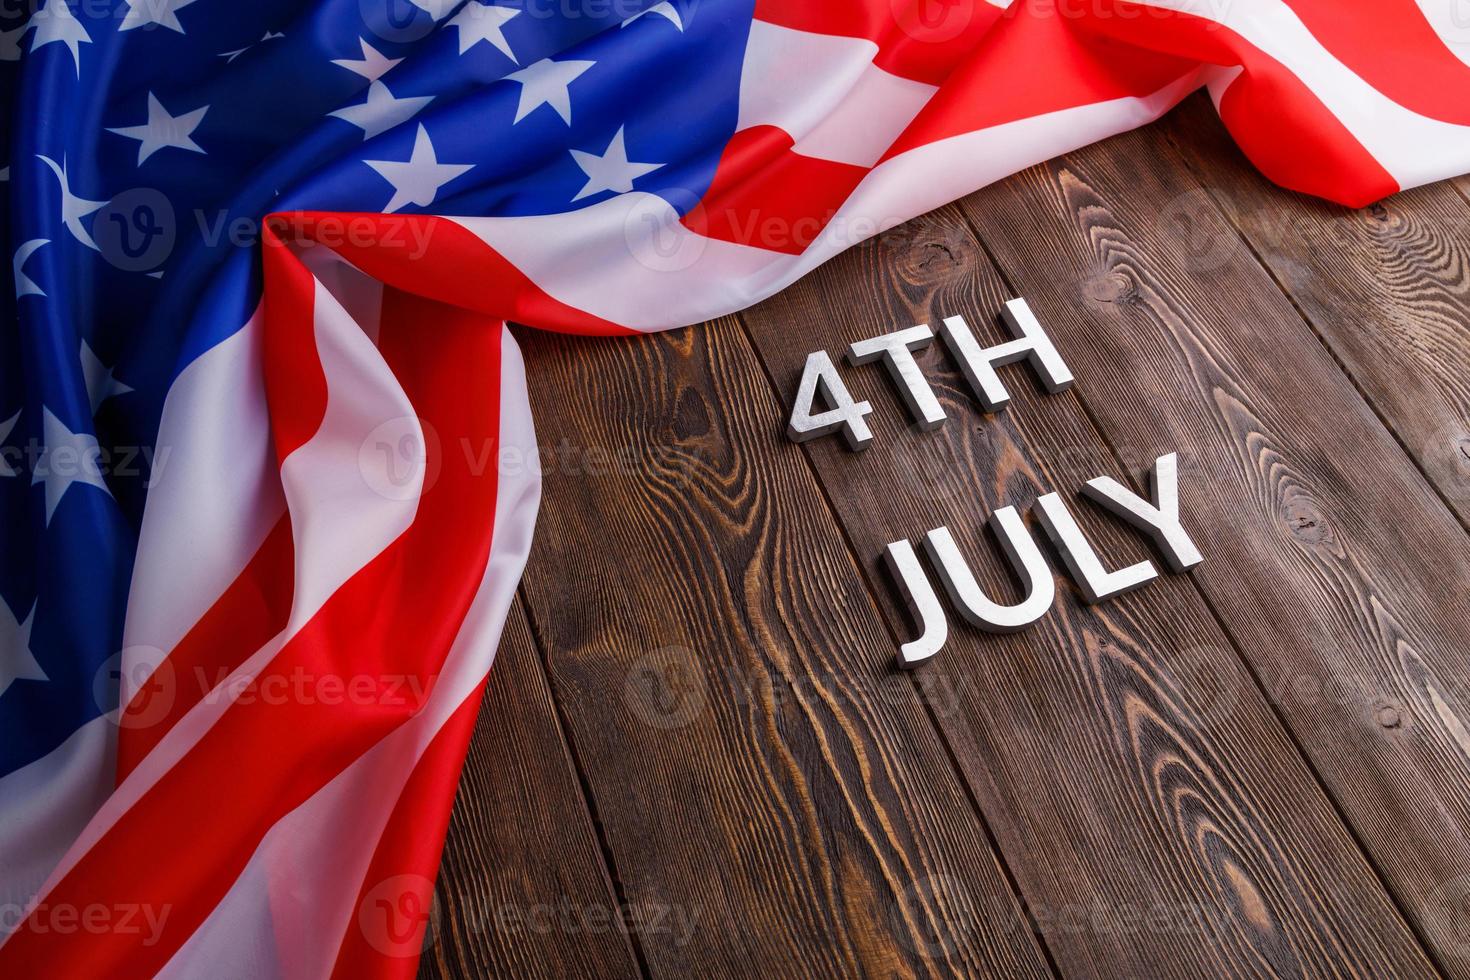 the words 4th july and crumpled usa flag on flat textured wooden surface background photo